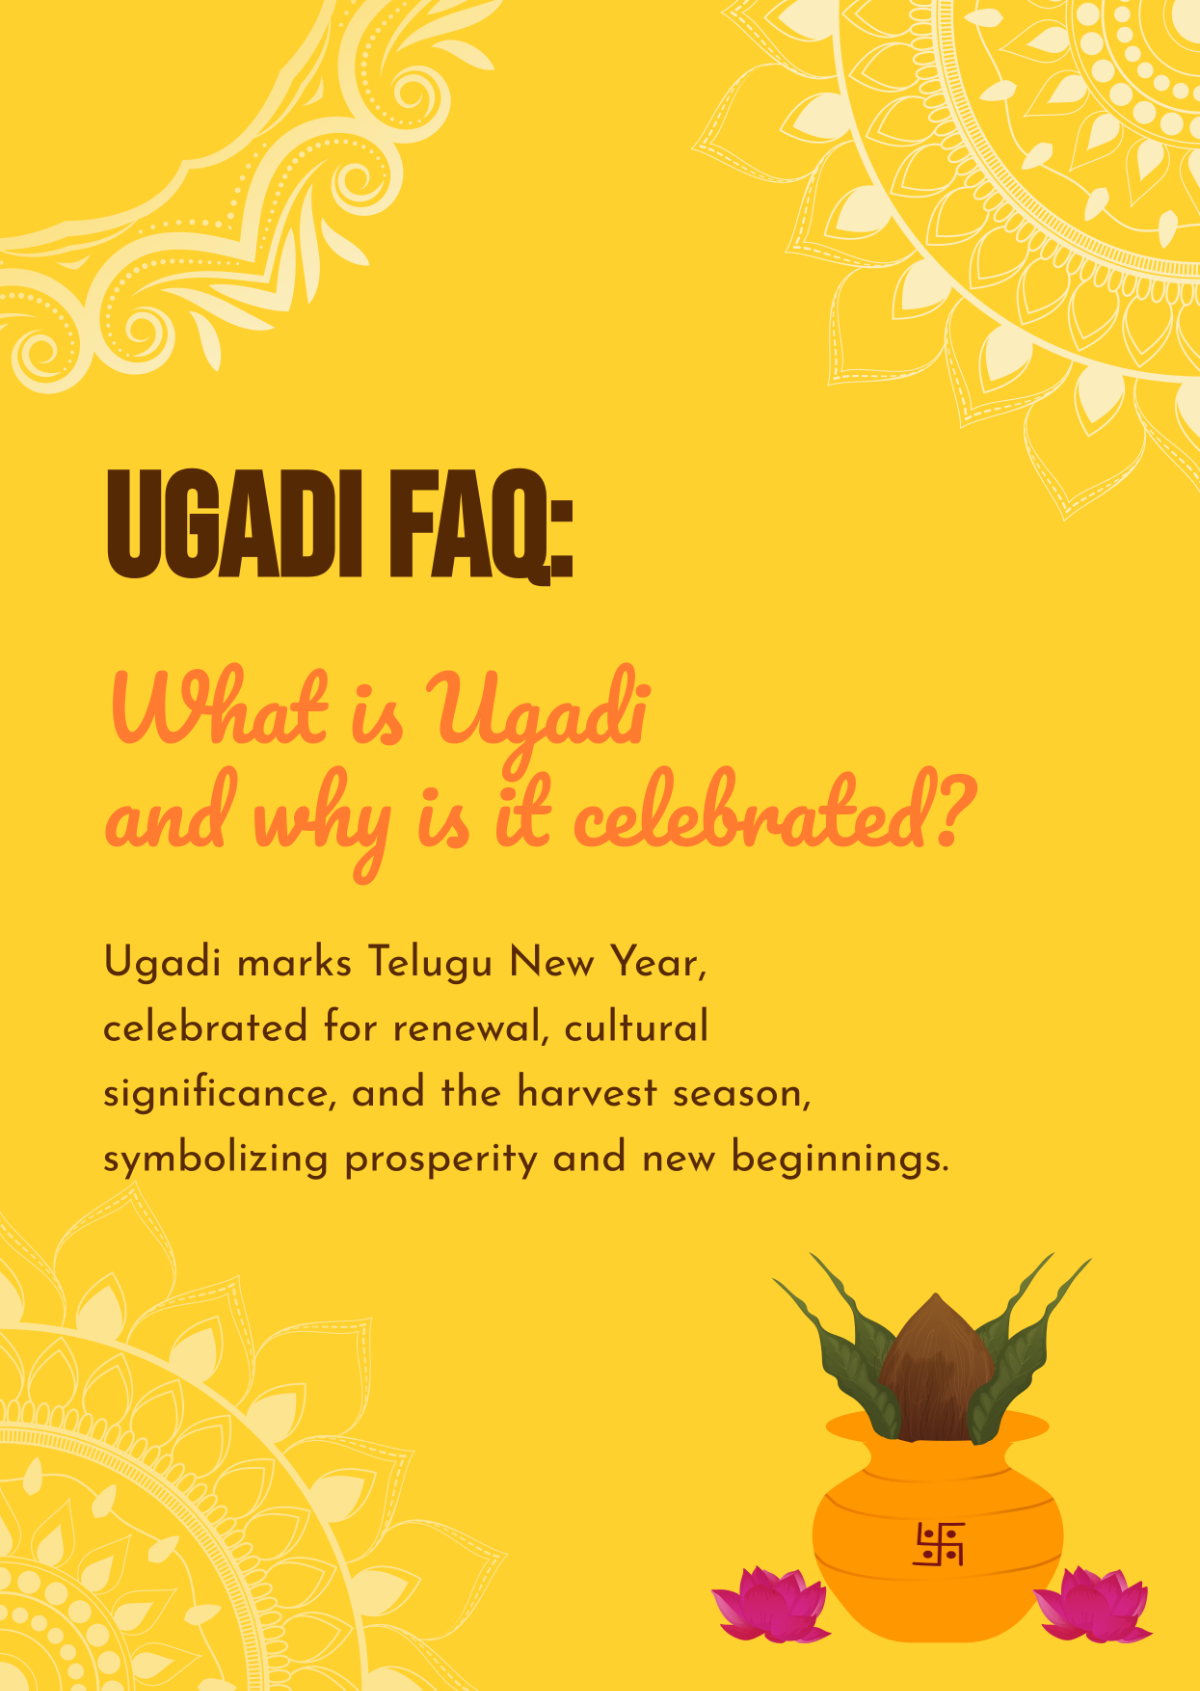 Free What is Ugadi and why is it celebrated? Template